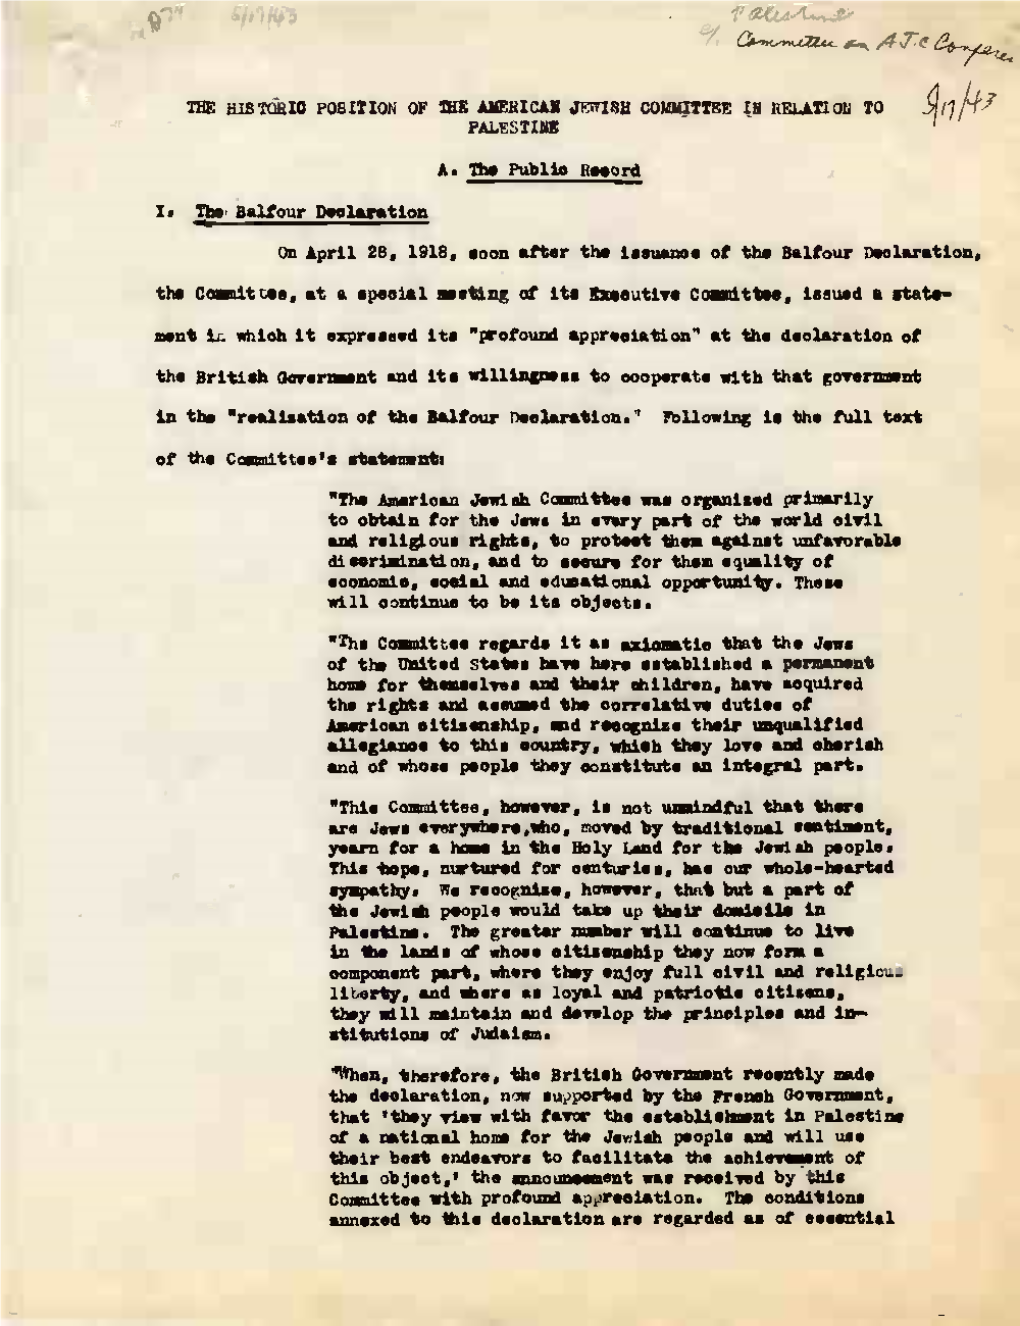 "The Historic Position of the American Jewish Committee in Relation to Palestine, 1943." See Pp. 4